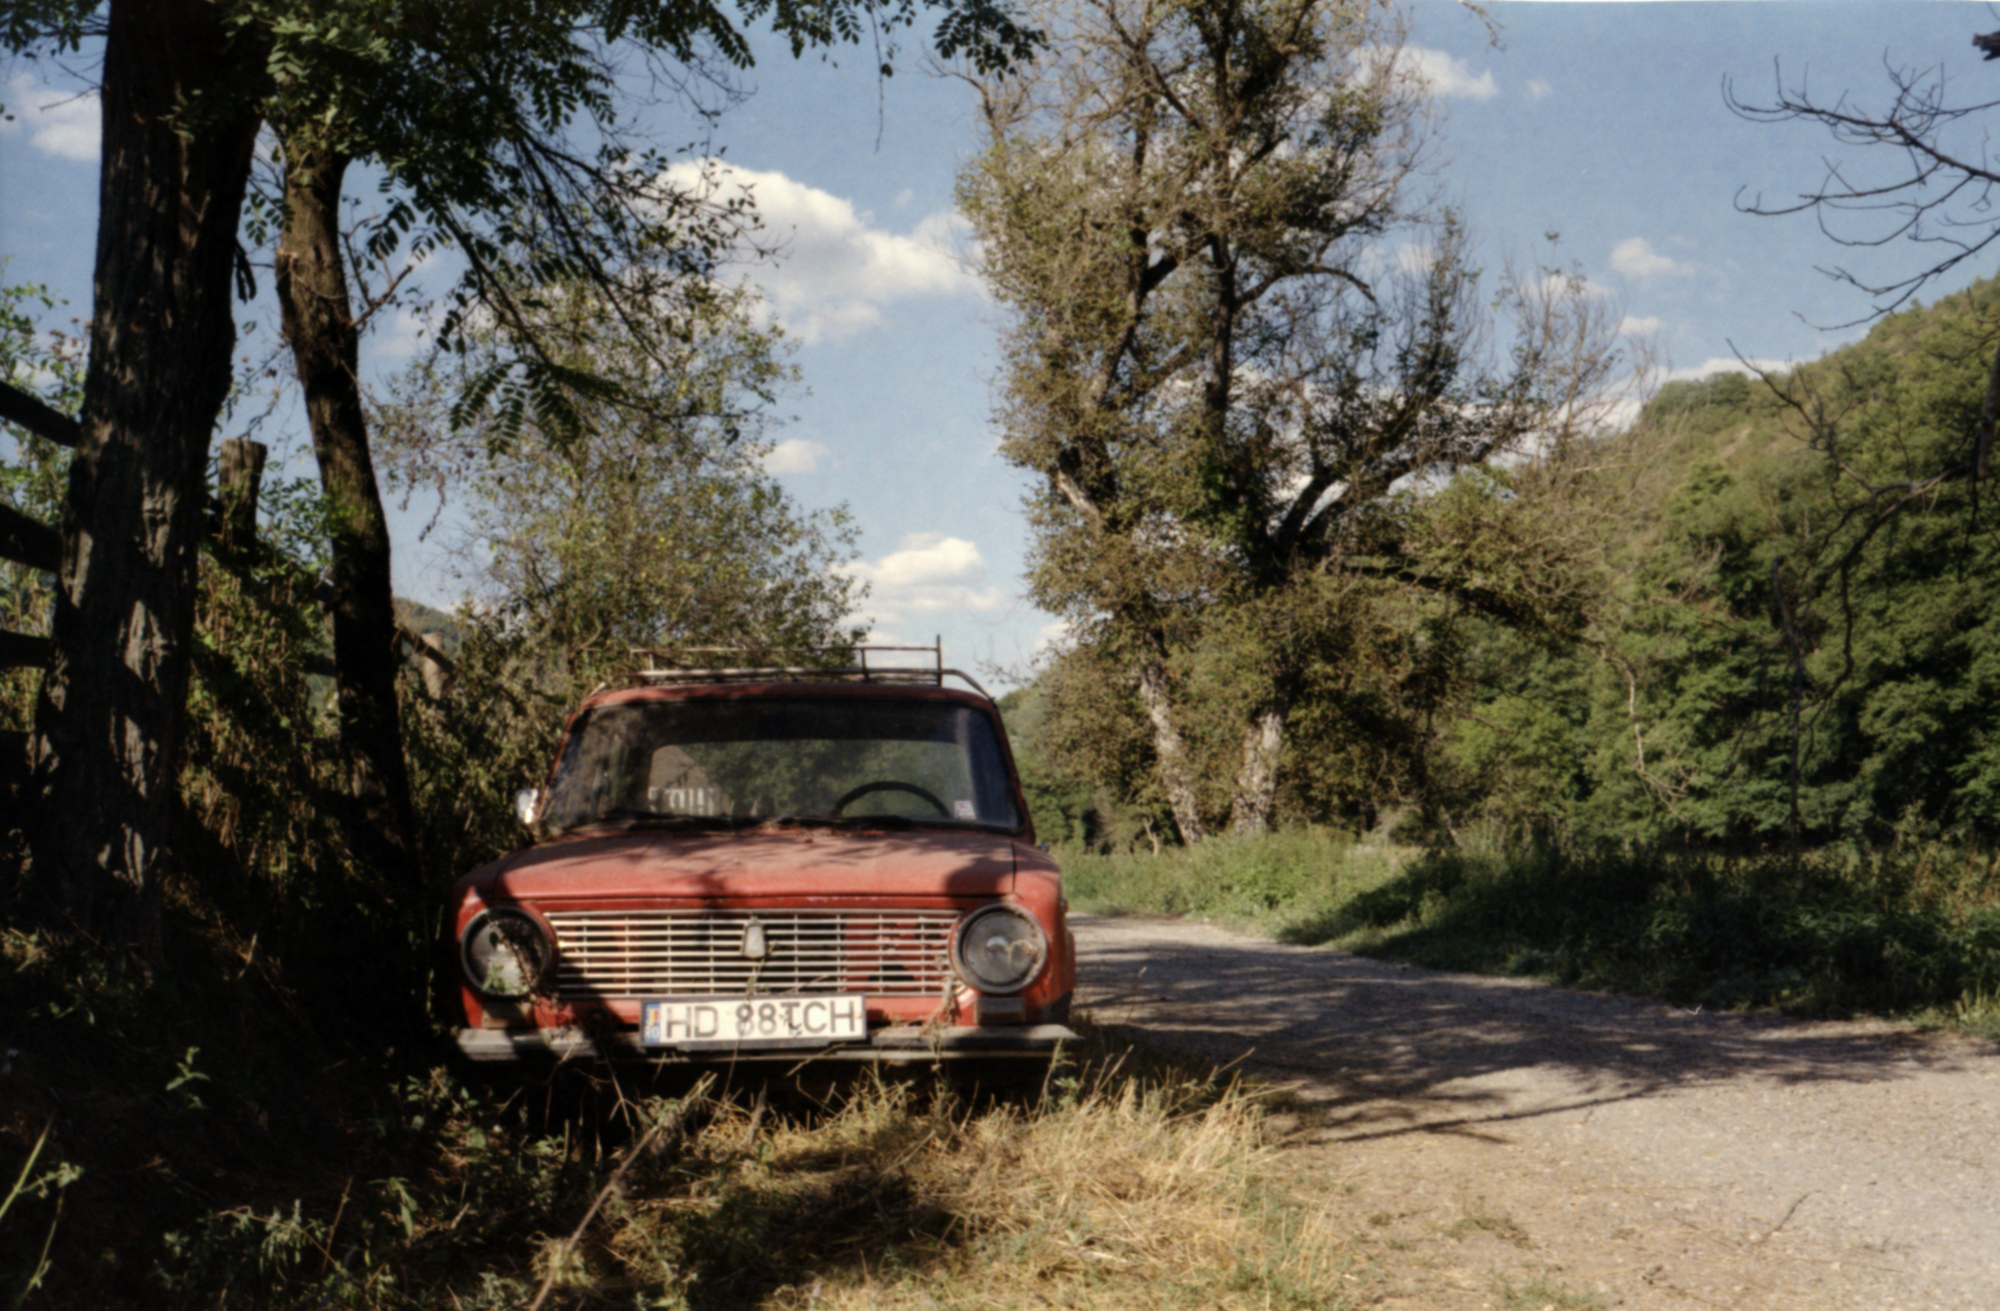 Colour photo of an old red broken-down car on the side of a dirt road. It's a beautiful summer's day with scattered clouds in the sky. There are some trees on both sides of the road, it almost looks as if the car is resting in the shade of the trees.